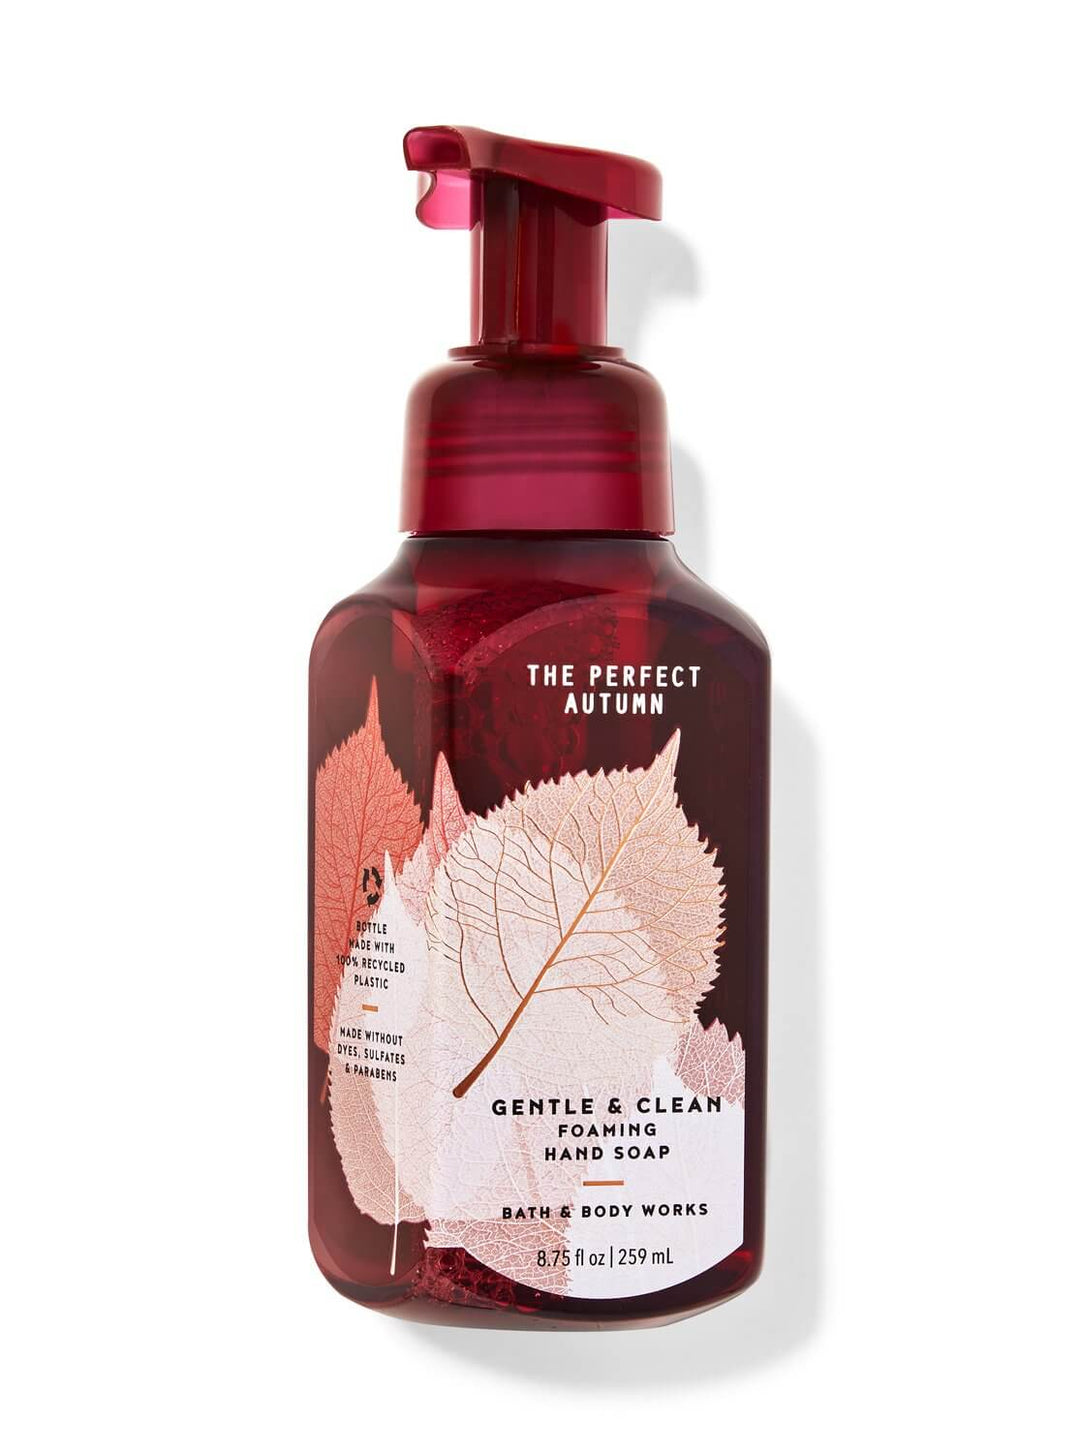 Bath & Body Works The Perfect Autumn Gentle Foaming Hand Soap 259ml